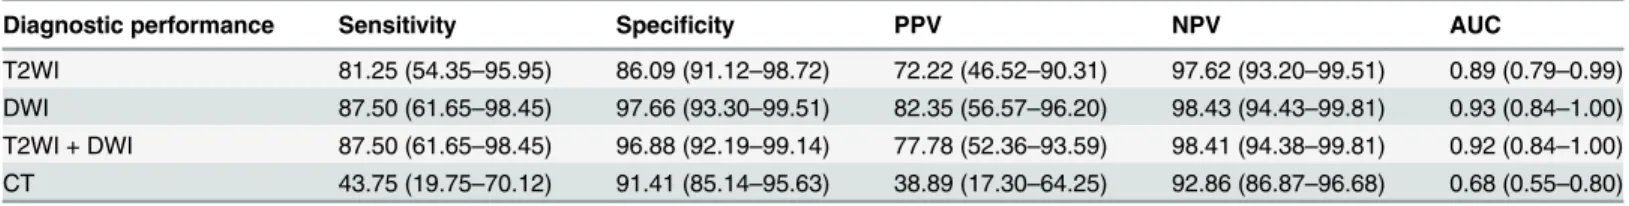 Table 3. Diagnostic performance of T2WI, DWI, and CT for detecting liver metastasis.